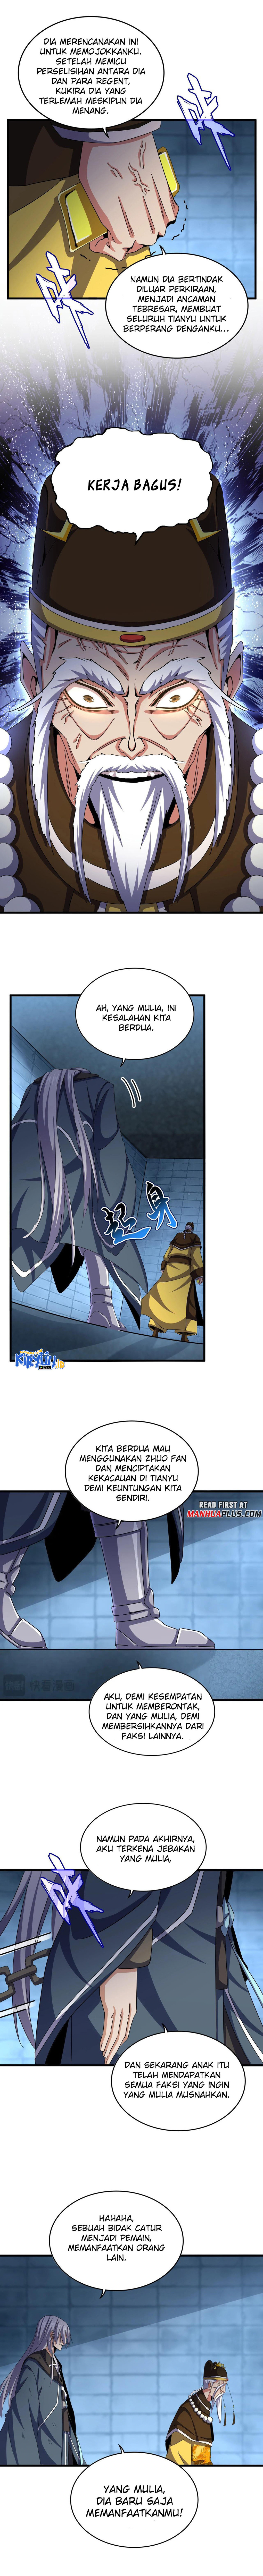 Magic Emperor Chapter 509 Image 6